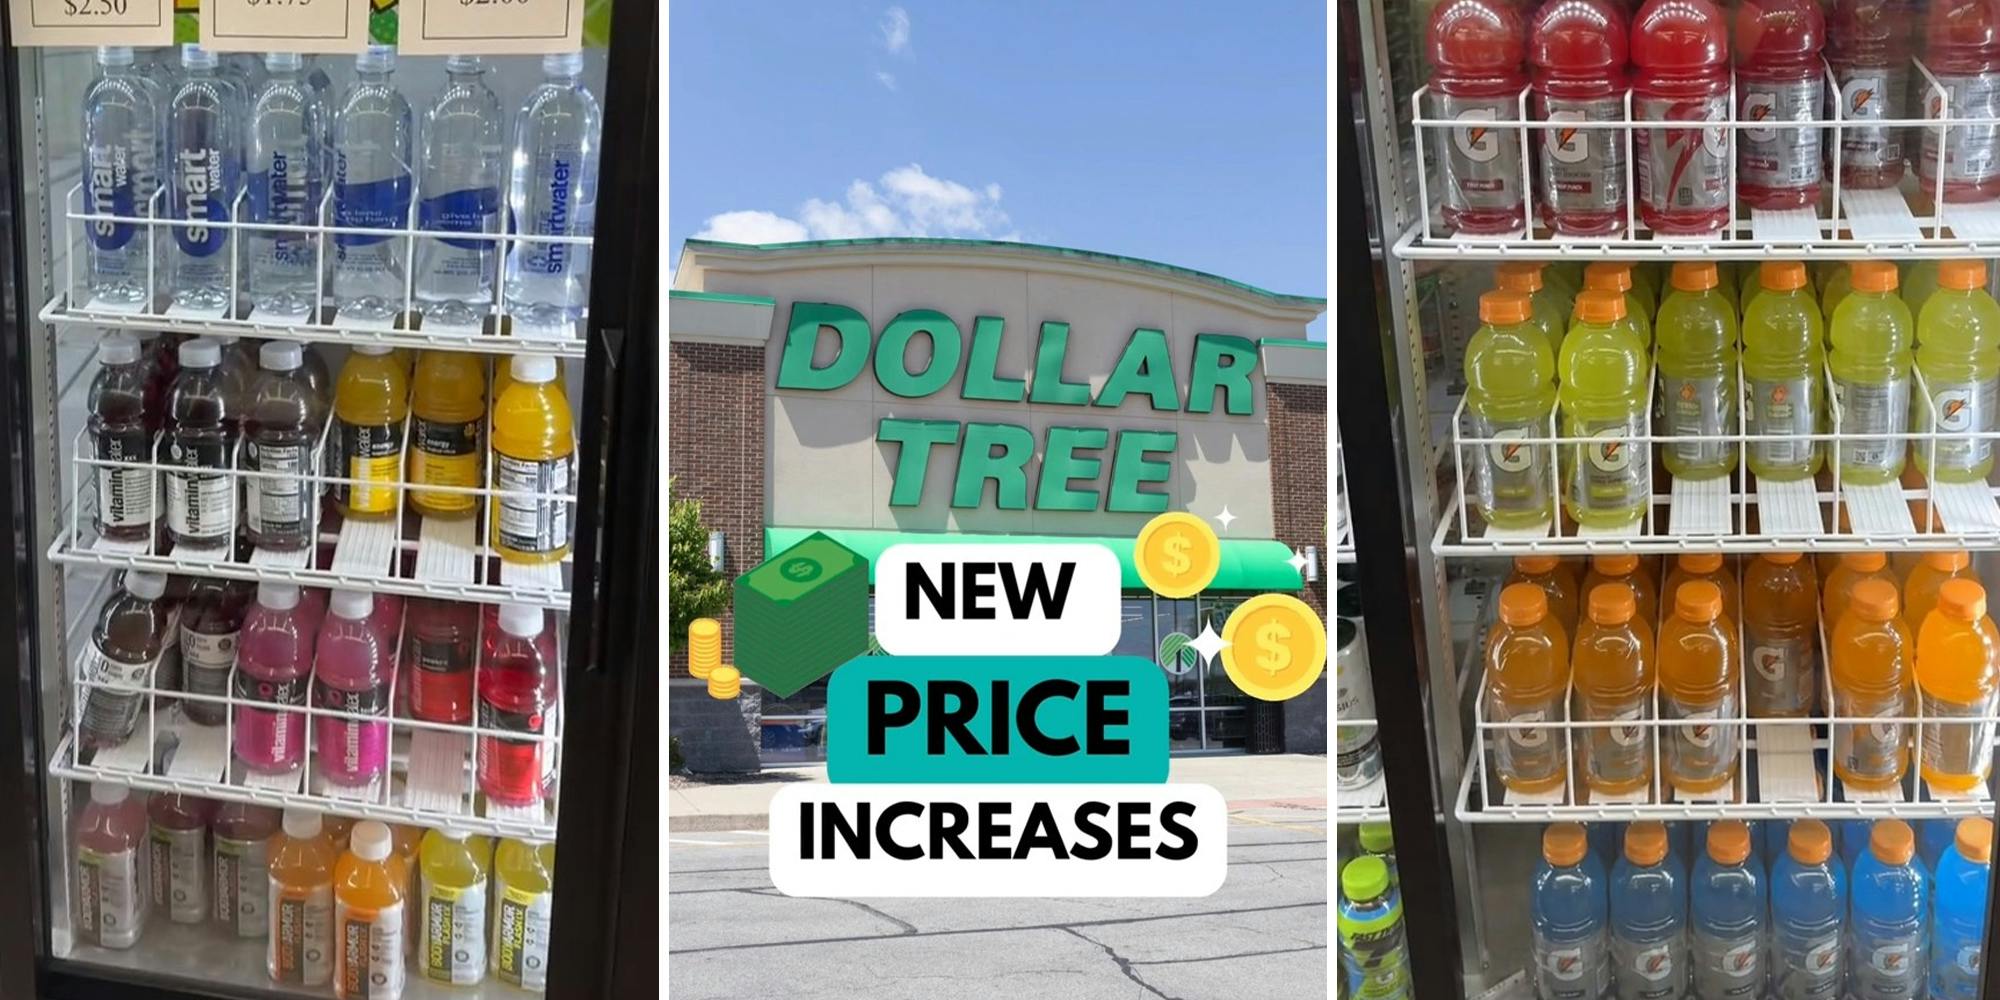 Dollar Tree Shopper Says Store Secretly Increased Prices